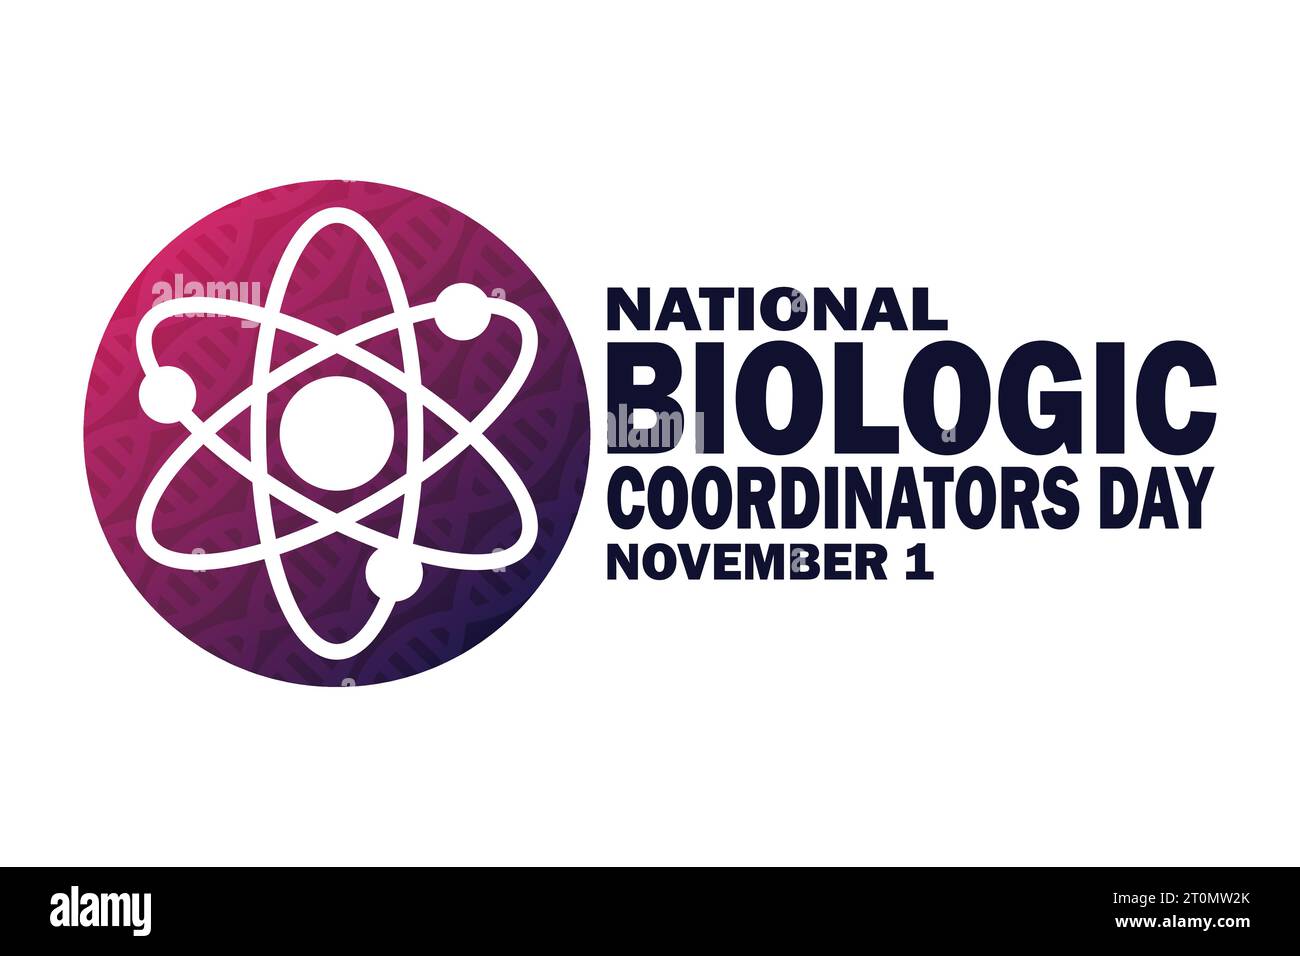 National Biologic Coordinators Day. November 1. Holiday concept. Template for background, banner, card, poster with text inscription. Vector Stock Vector